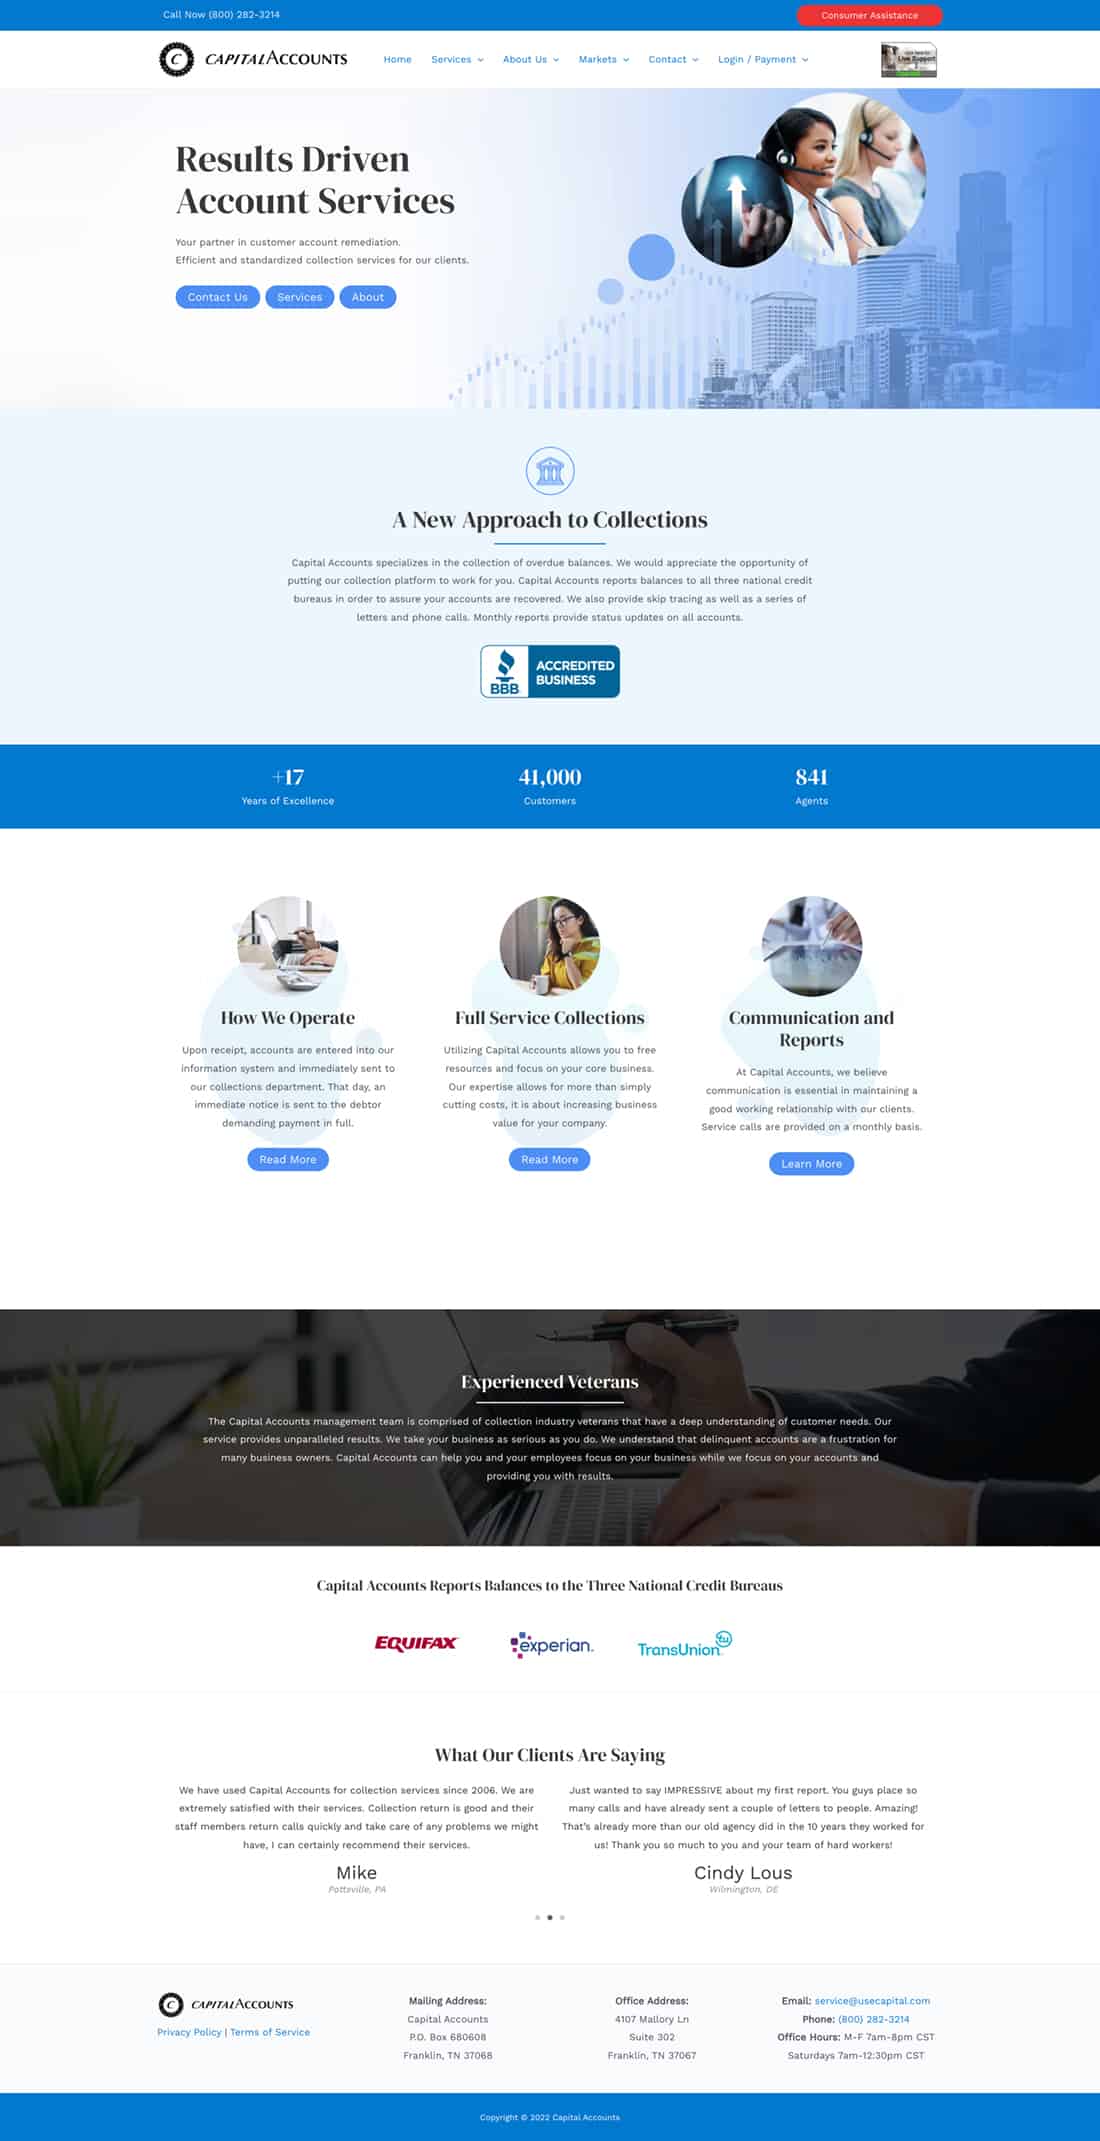 Capital Accounts Website Design Franklin Tennessee